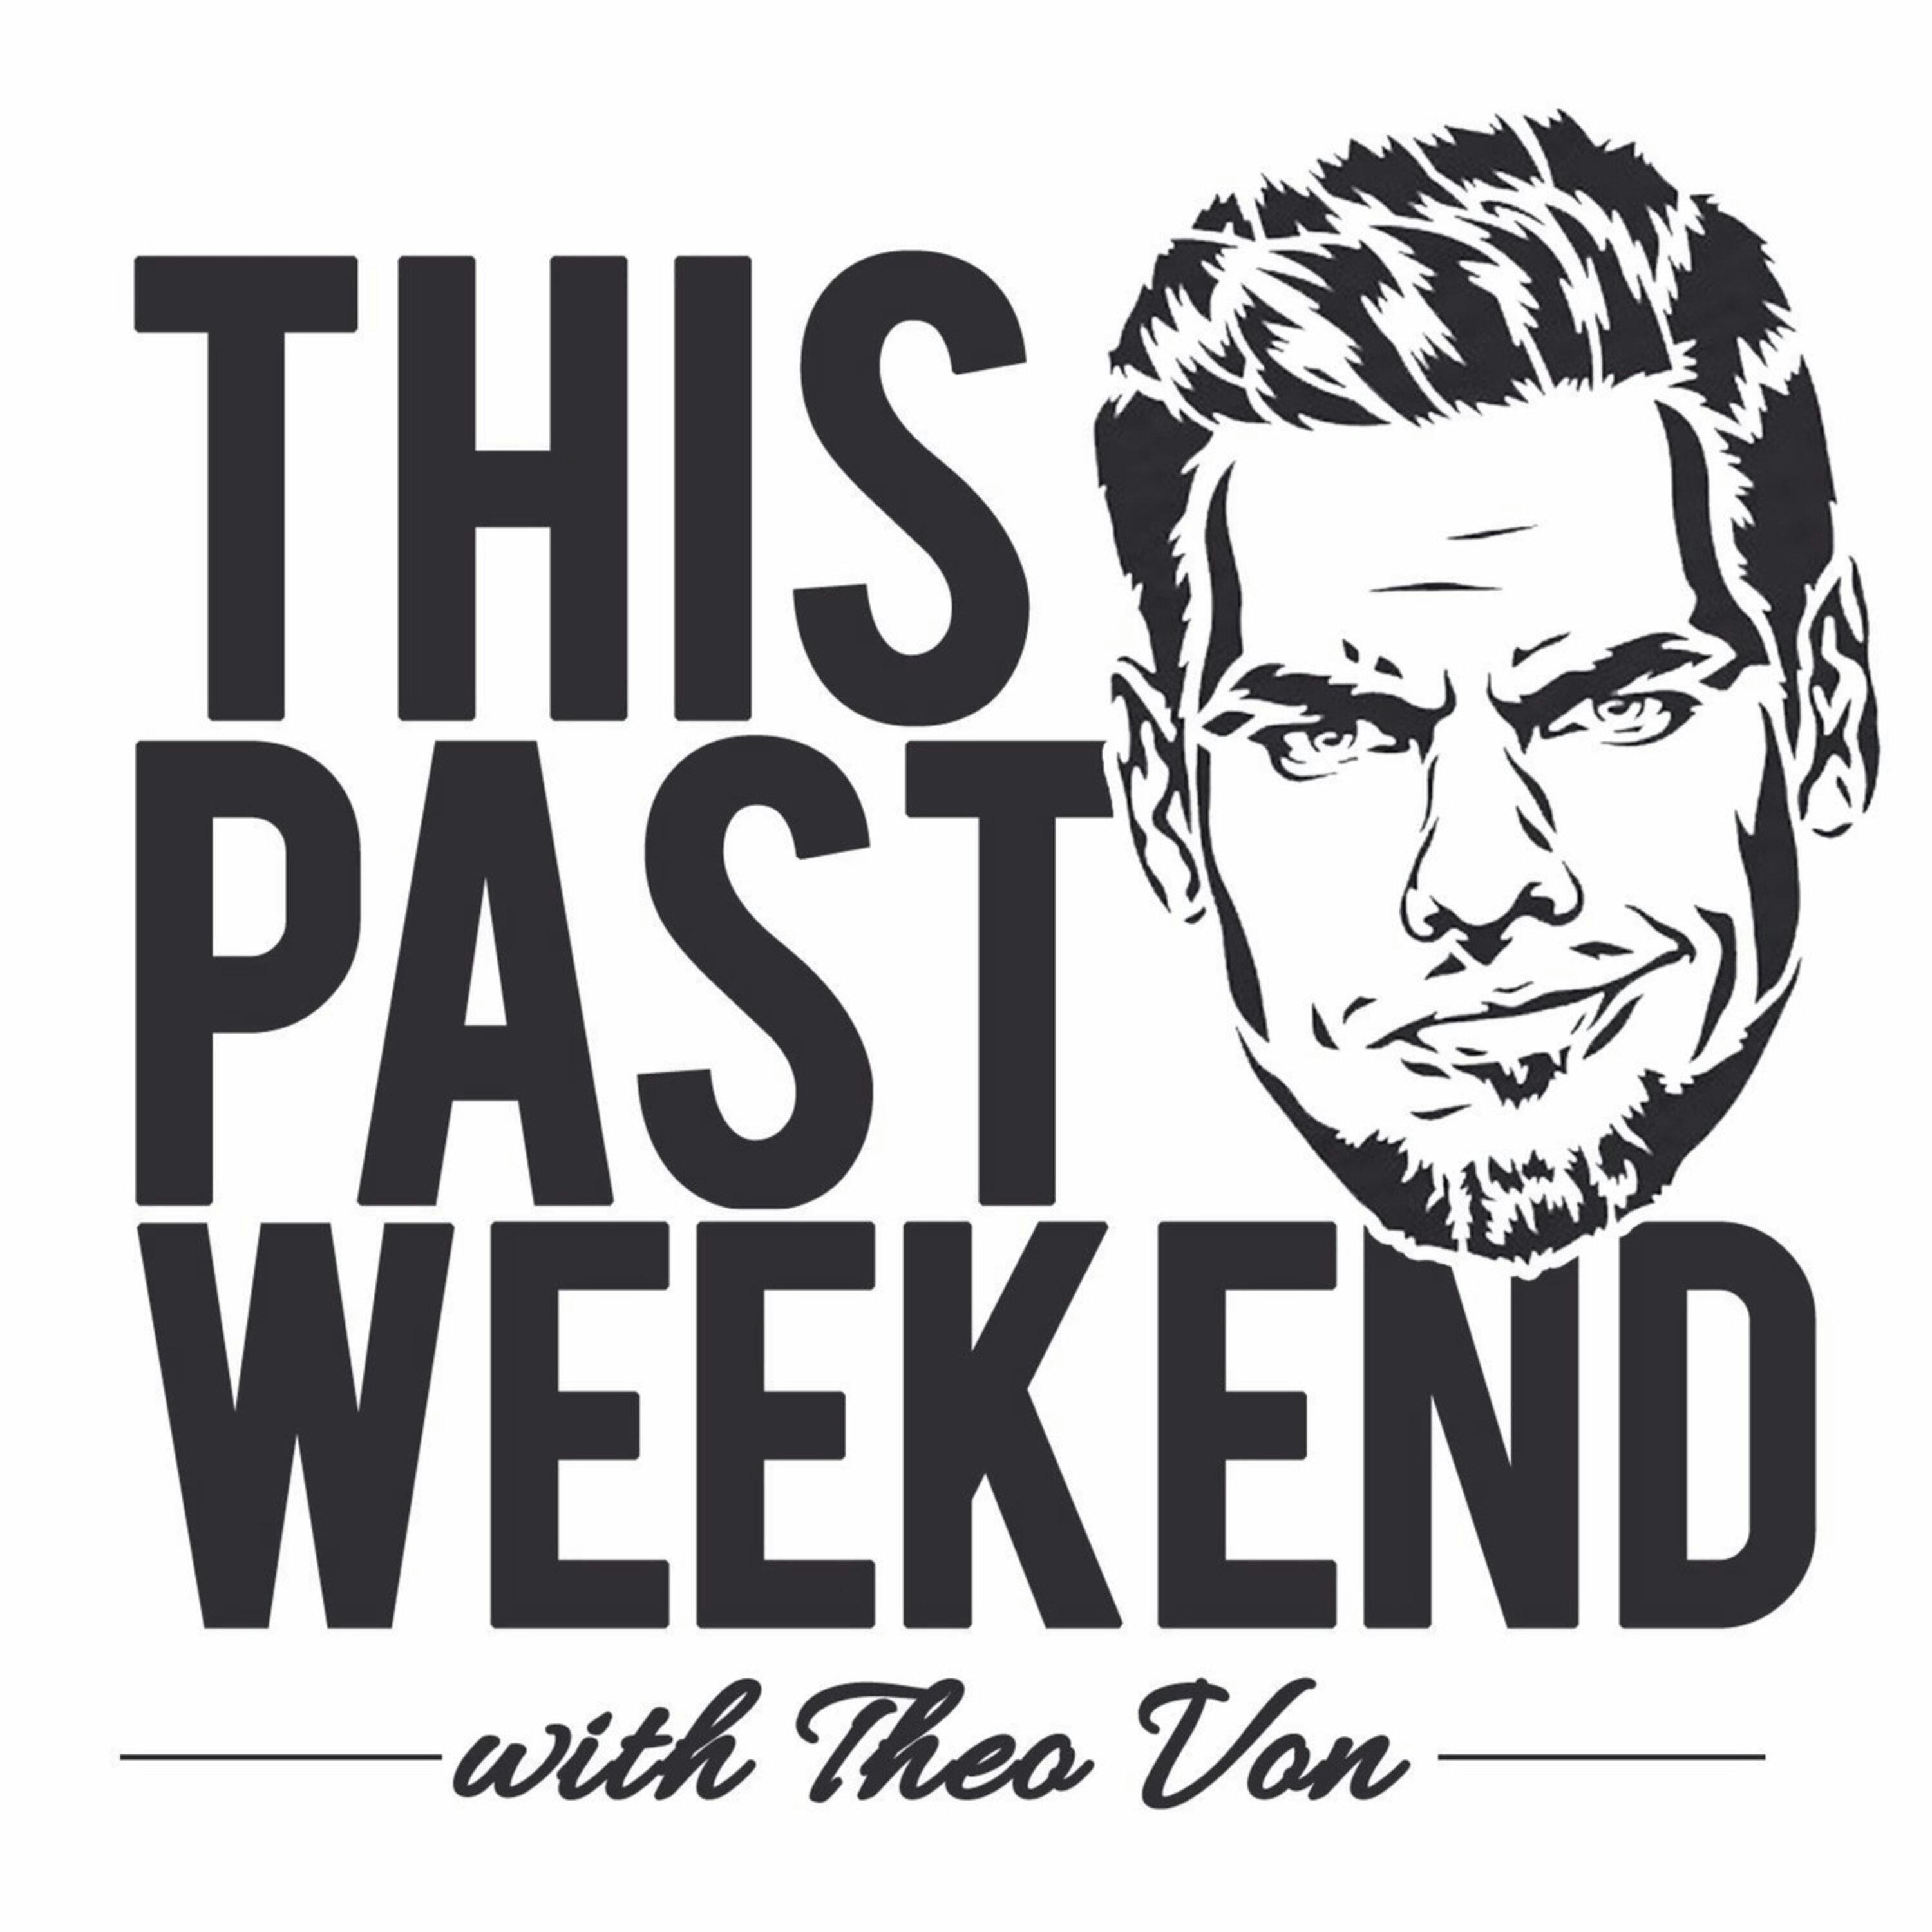 Responses to Wife Strife | This Past Weekend #66 by Theo Von